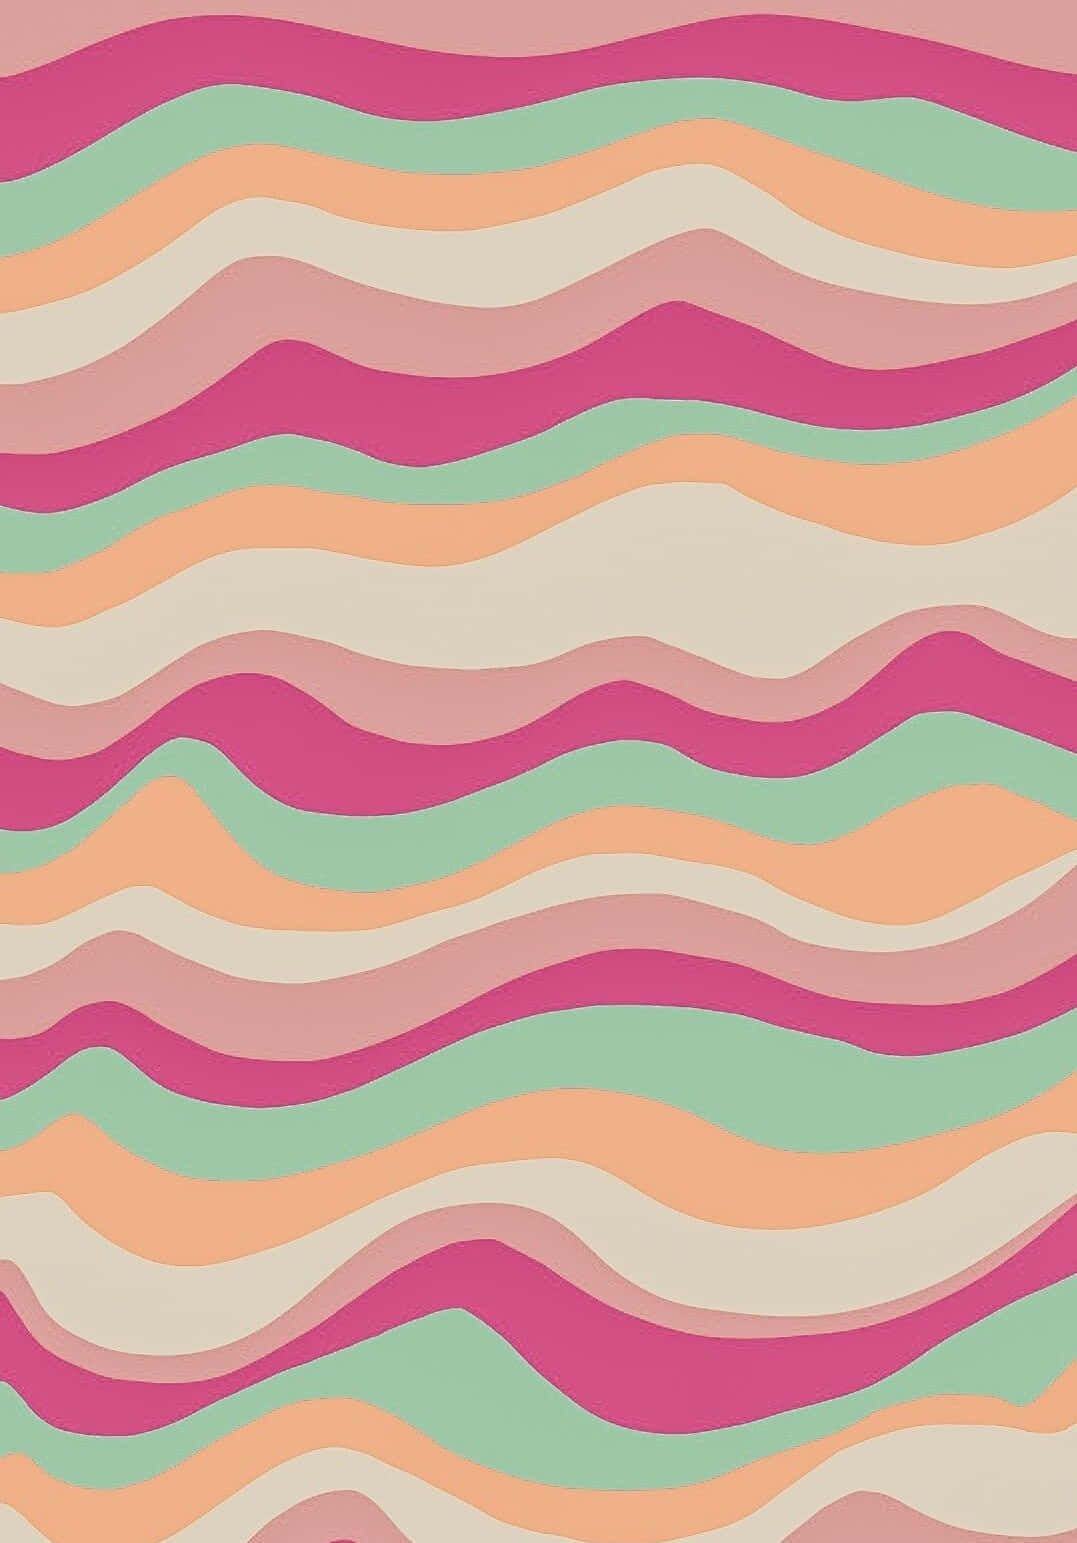 70's Groovy Background Wavy Purple And Blue Design